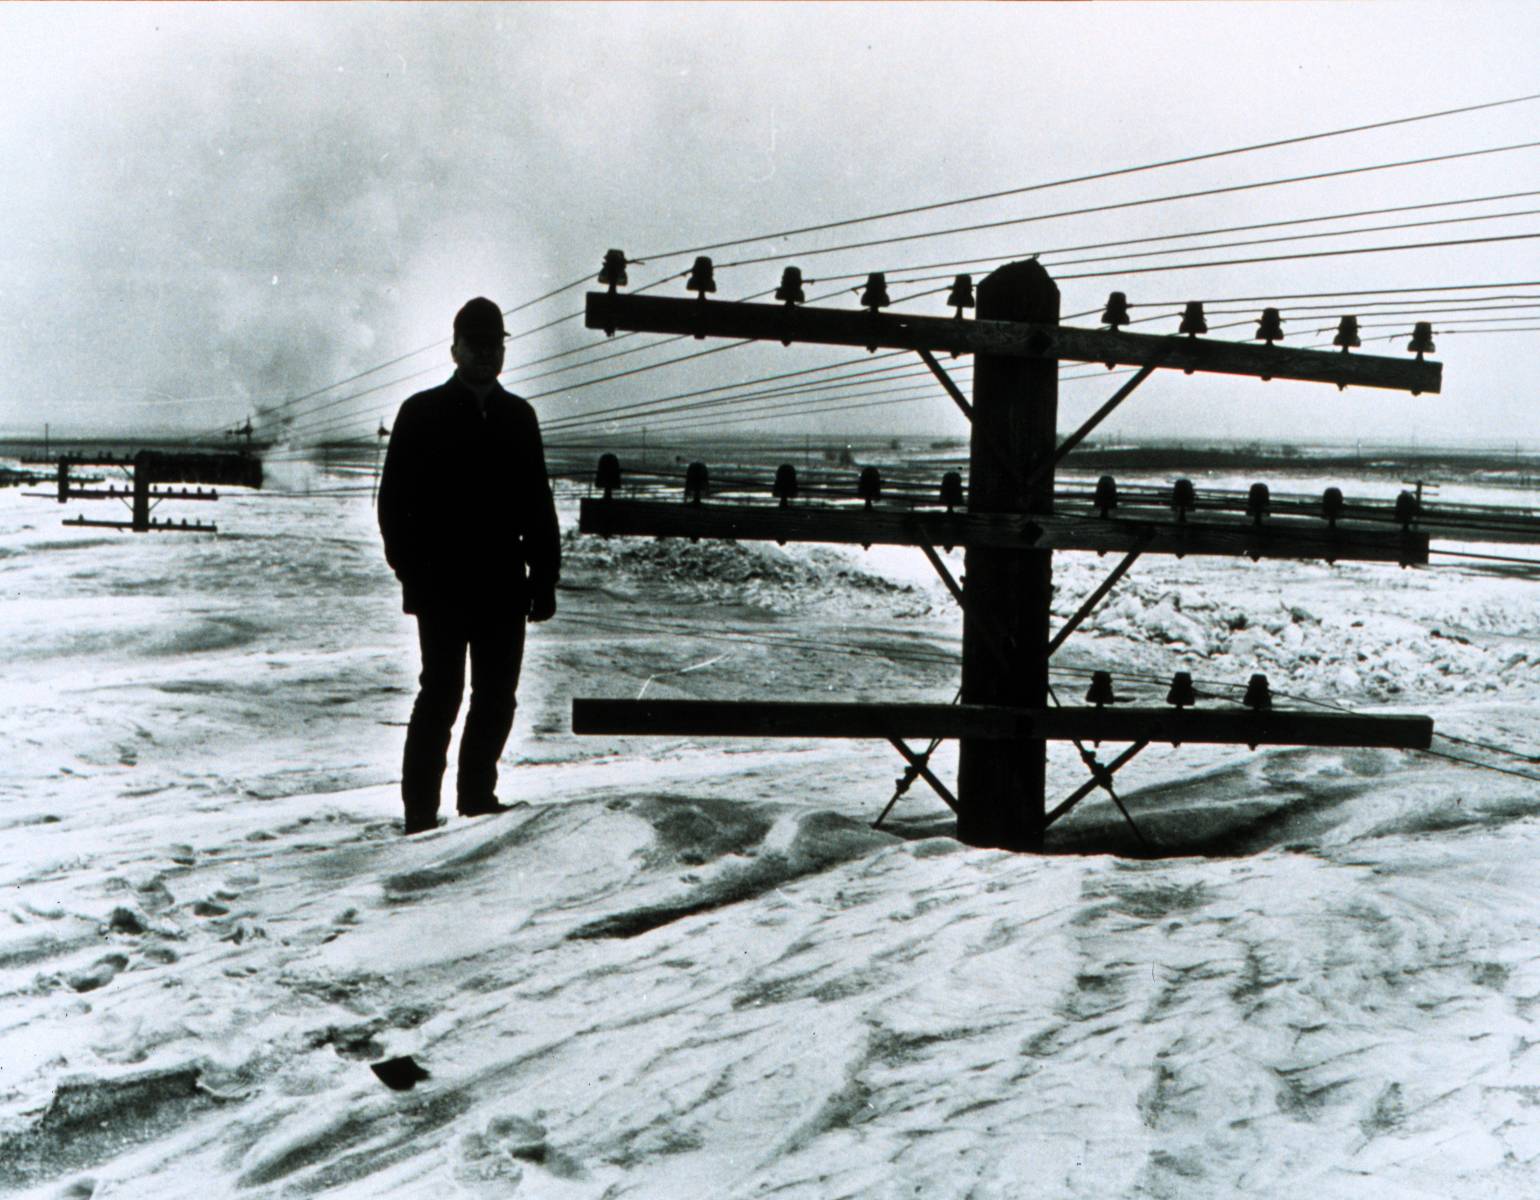 March blizzard in North Dakota, 1966. Caption jokingly reads "I believe there is a train under here somewhere!"